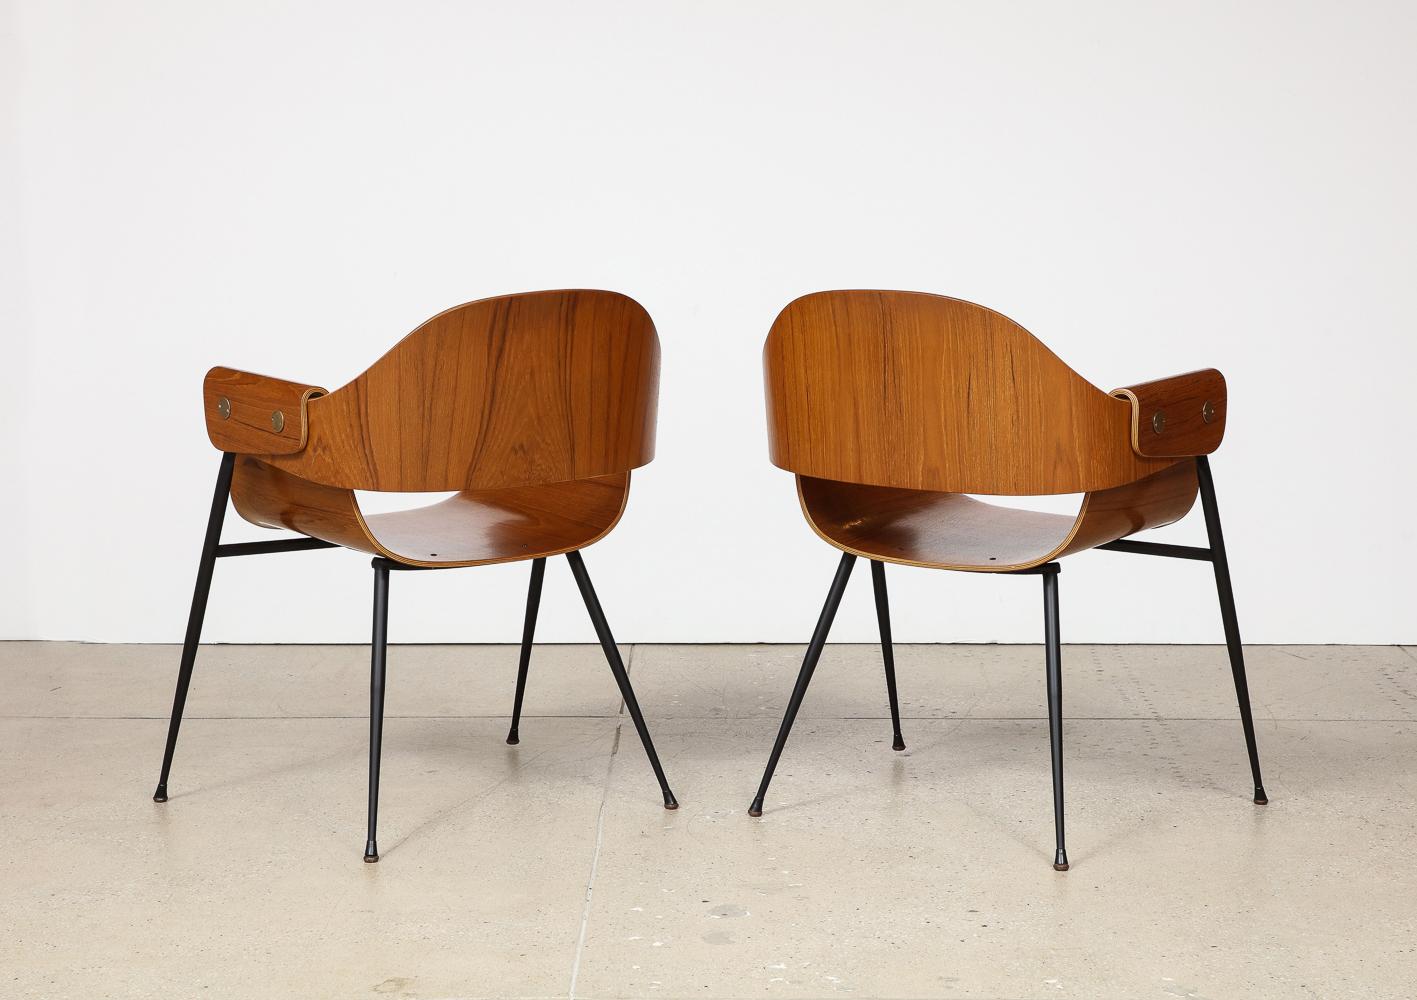 Hand-Crafted Bentwood Armchairs by Carlo Ratti